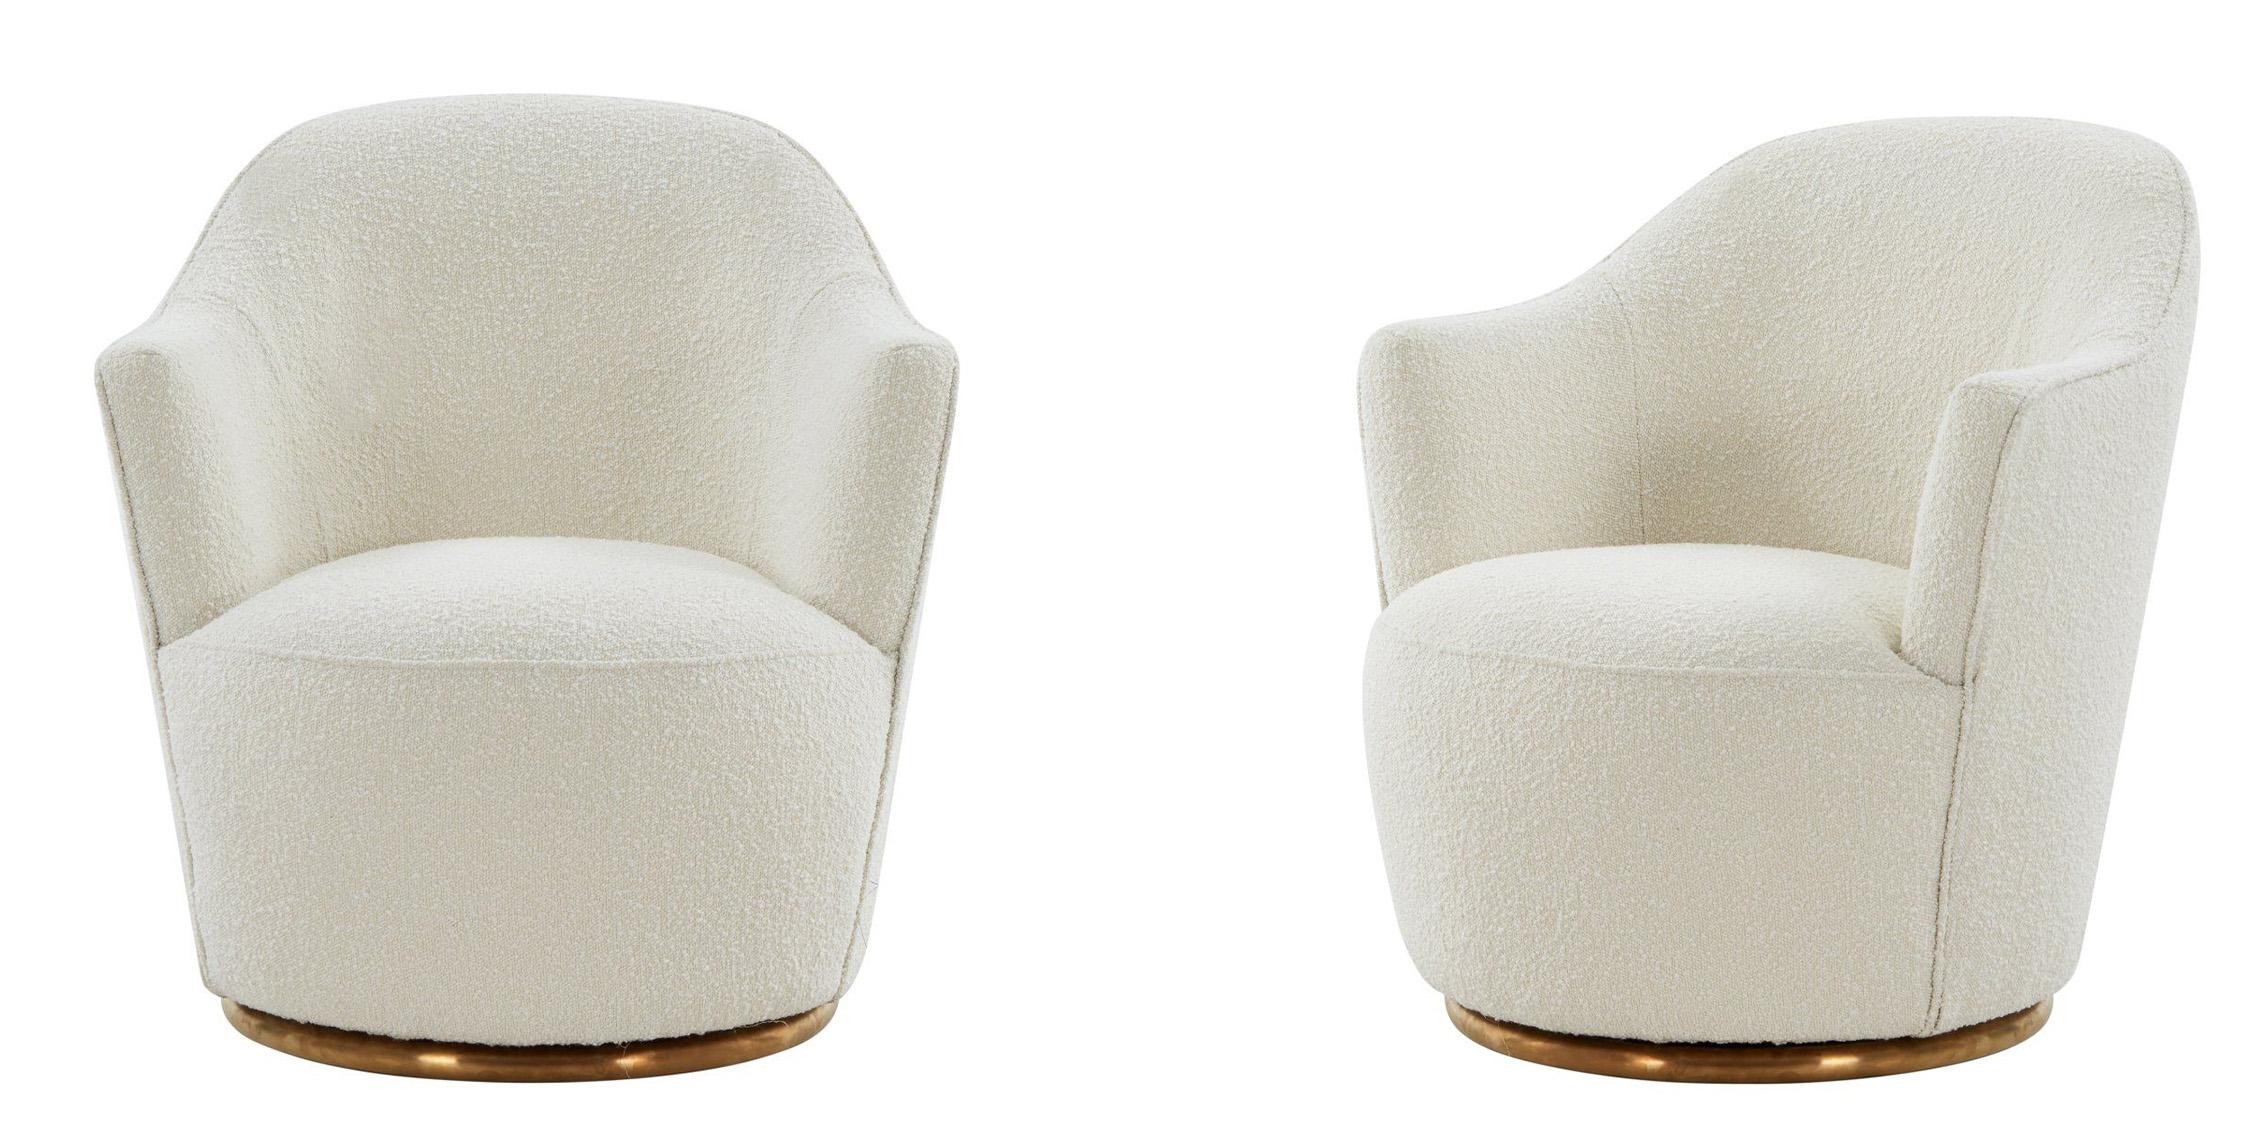 Contemporary, Modern Accent Chair Set VGRHAC-542-WHT-CH-Set-2 VGRHAC-542-WHT-CH-Set-2 in Cream Fabric